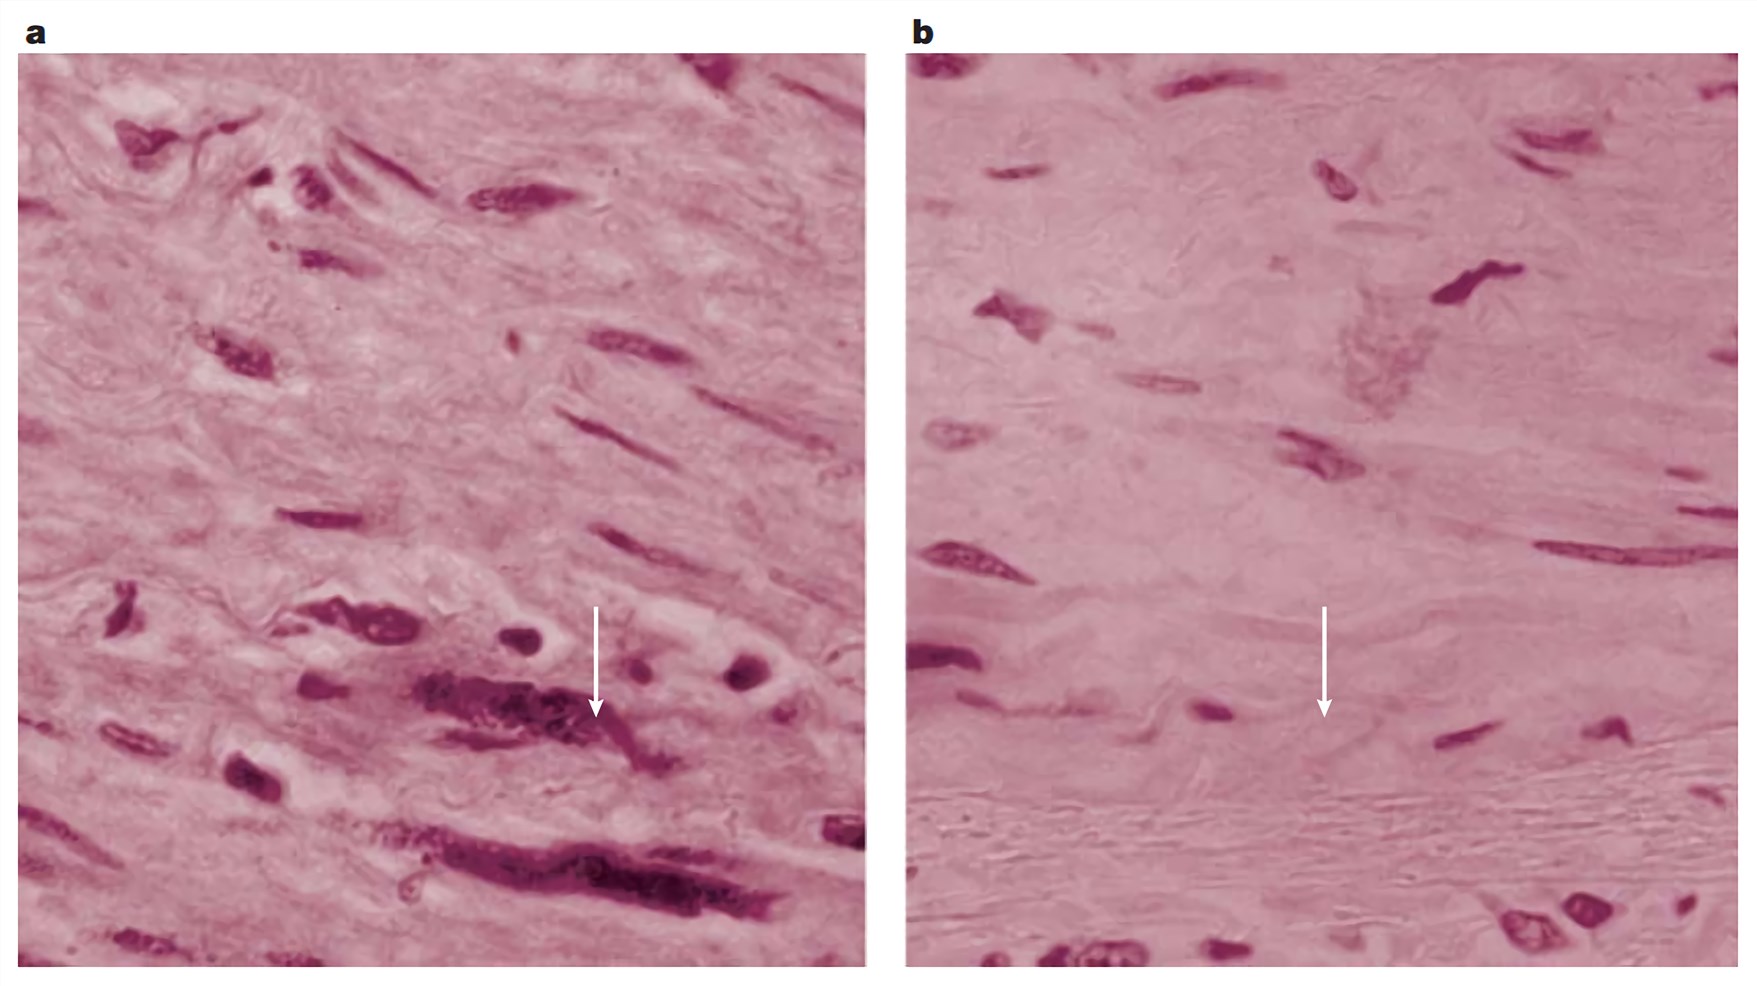 Immunocytochemical staining of a fibrous plaque of the coronary artery. a. Staining with a C. pneumoniae-specific monoclonal antibody. b. Staining with a control antibody. Arrows indicate positively stained foam cells.